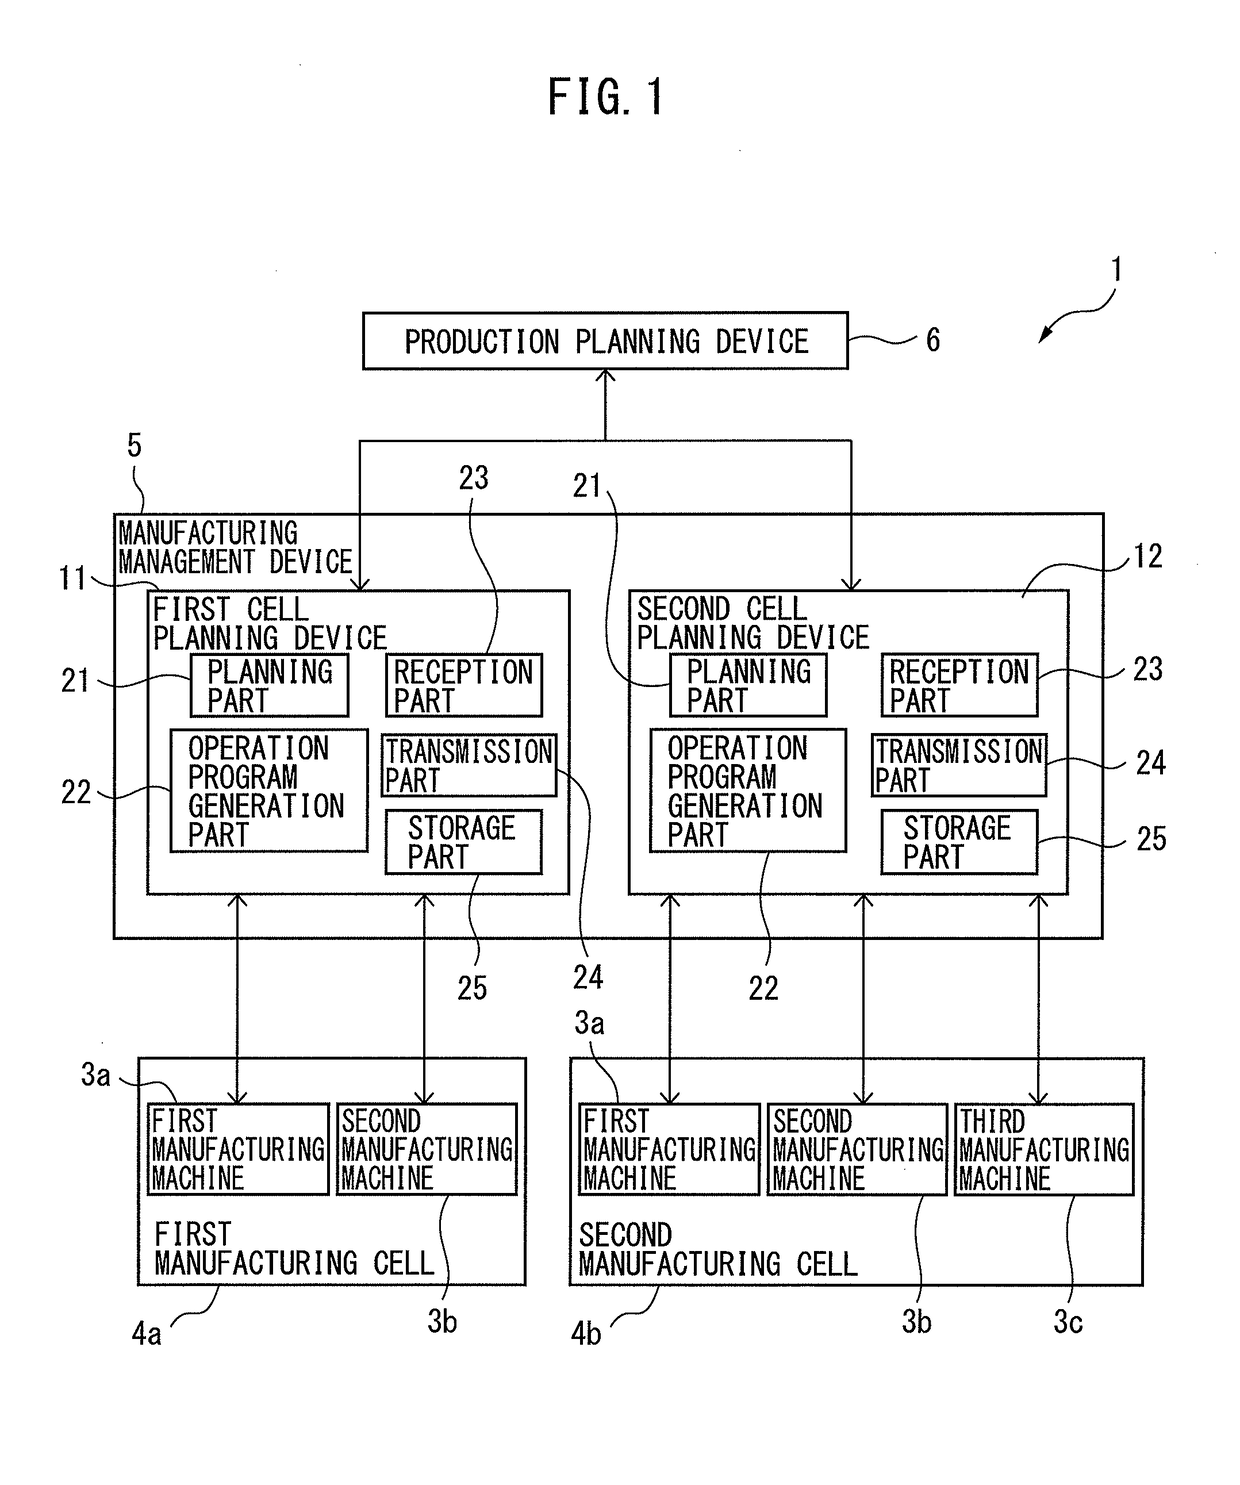 Manufacturing management device for controlling manufacturing cells in which maintenance work is conducted